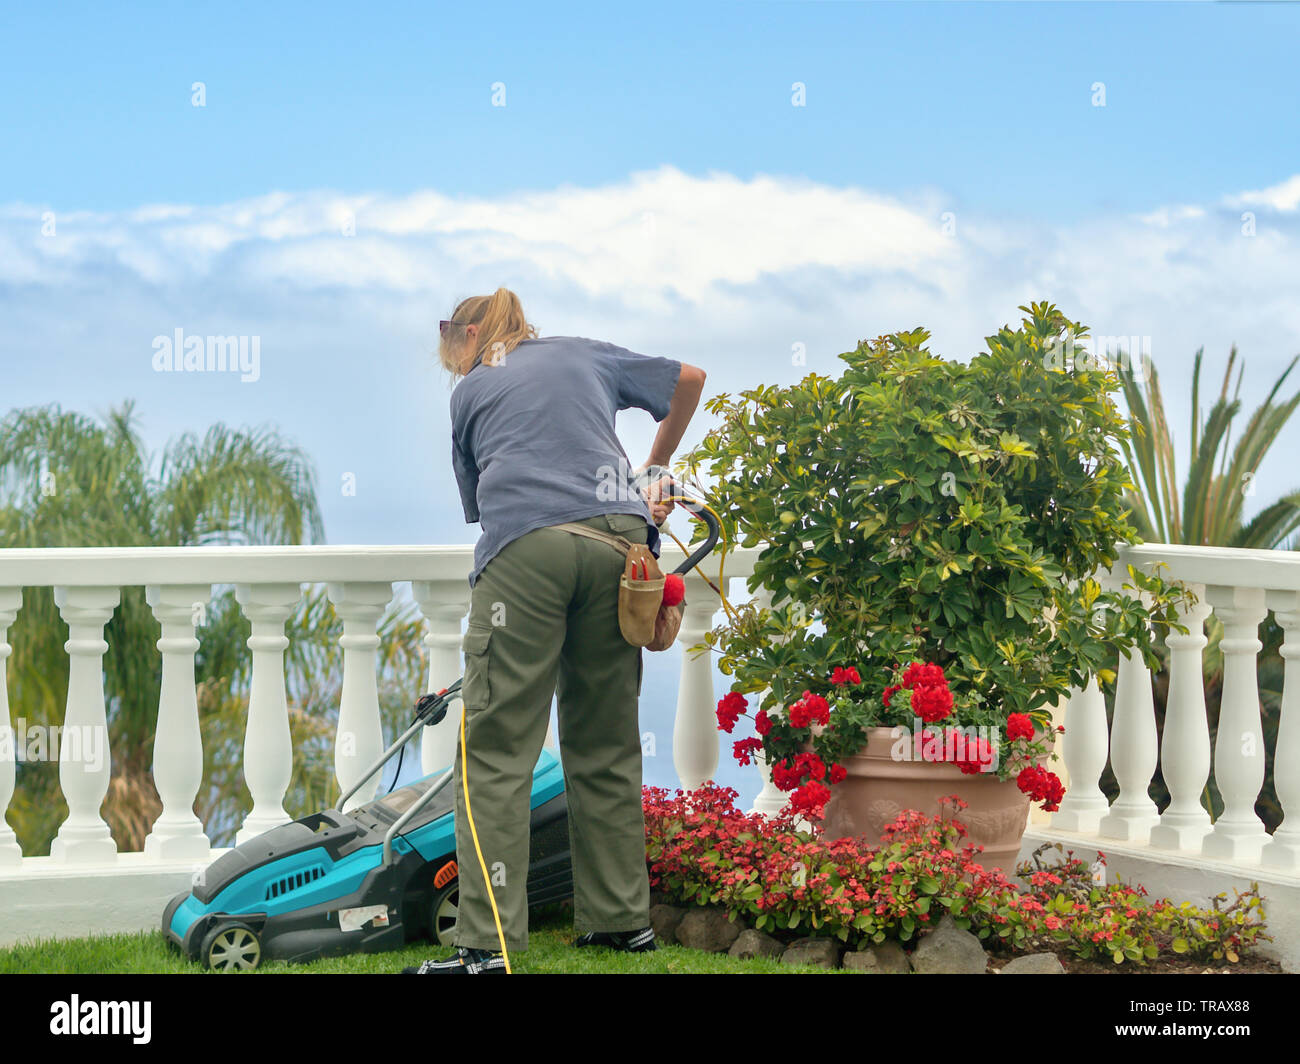 A gardener at work with the electric lawn mower, she is wearing work clothes, lateral back view. Stock Photo